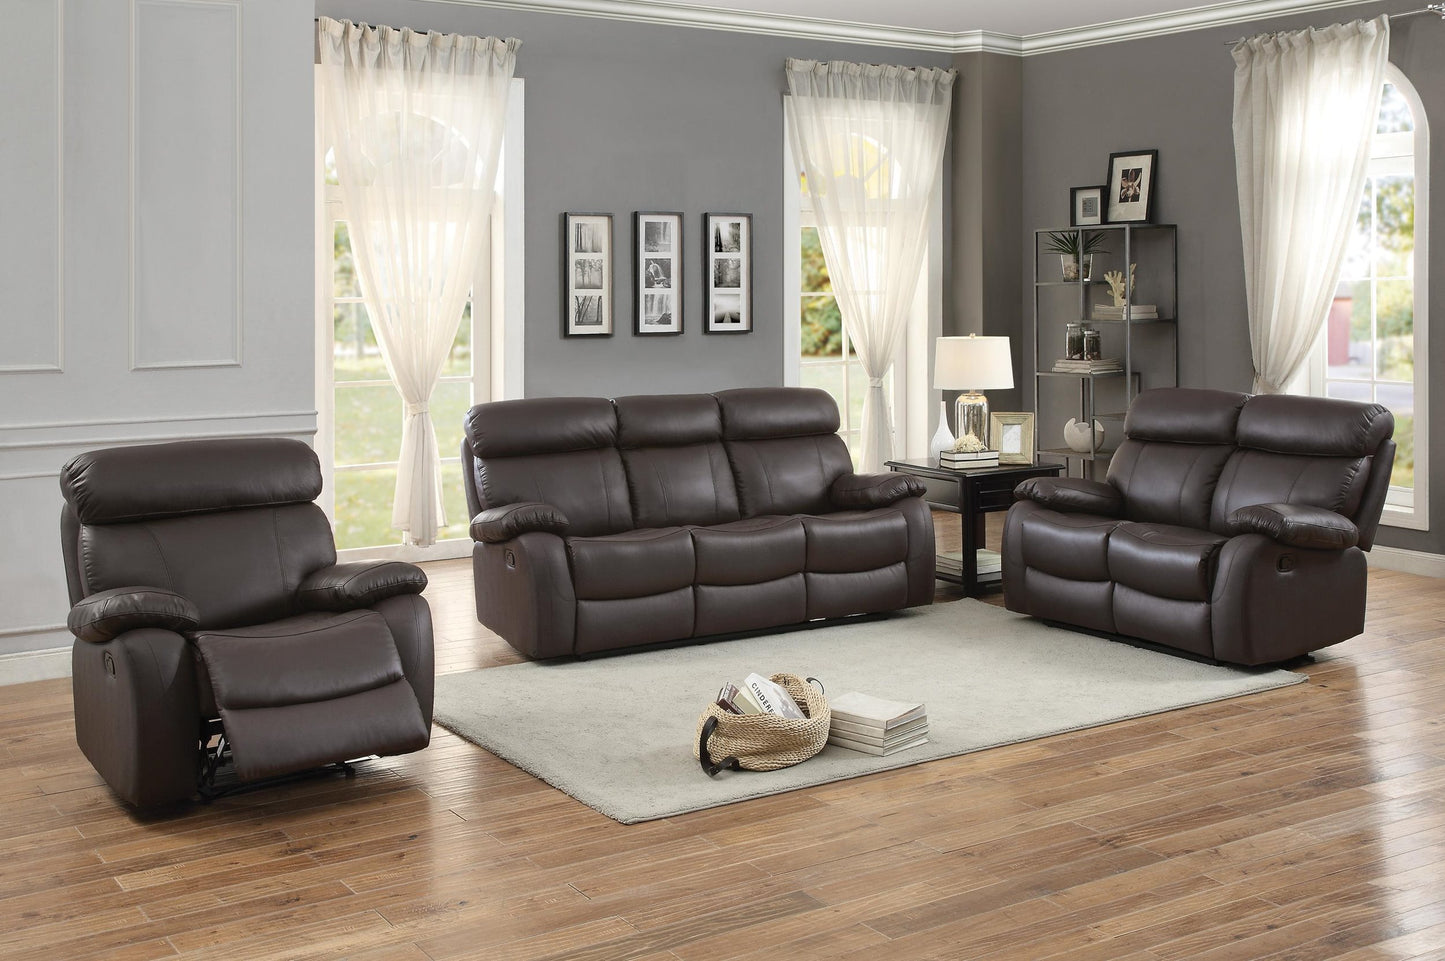 Homelegance Pendu Double Reclining Love Seat in Brown Leather